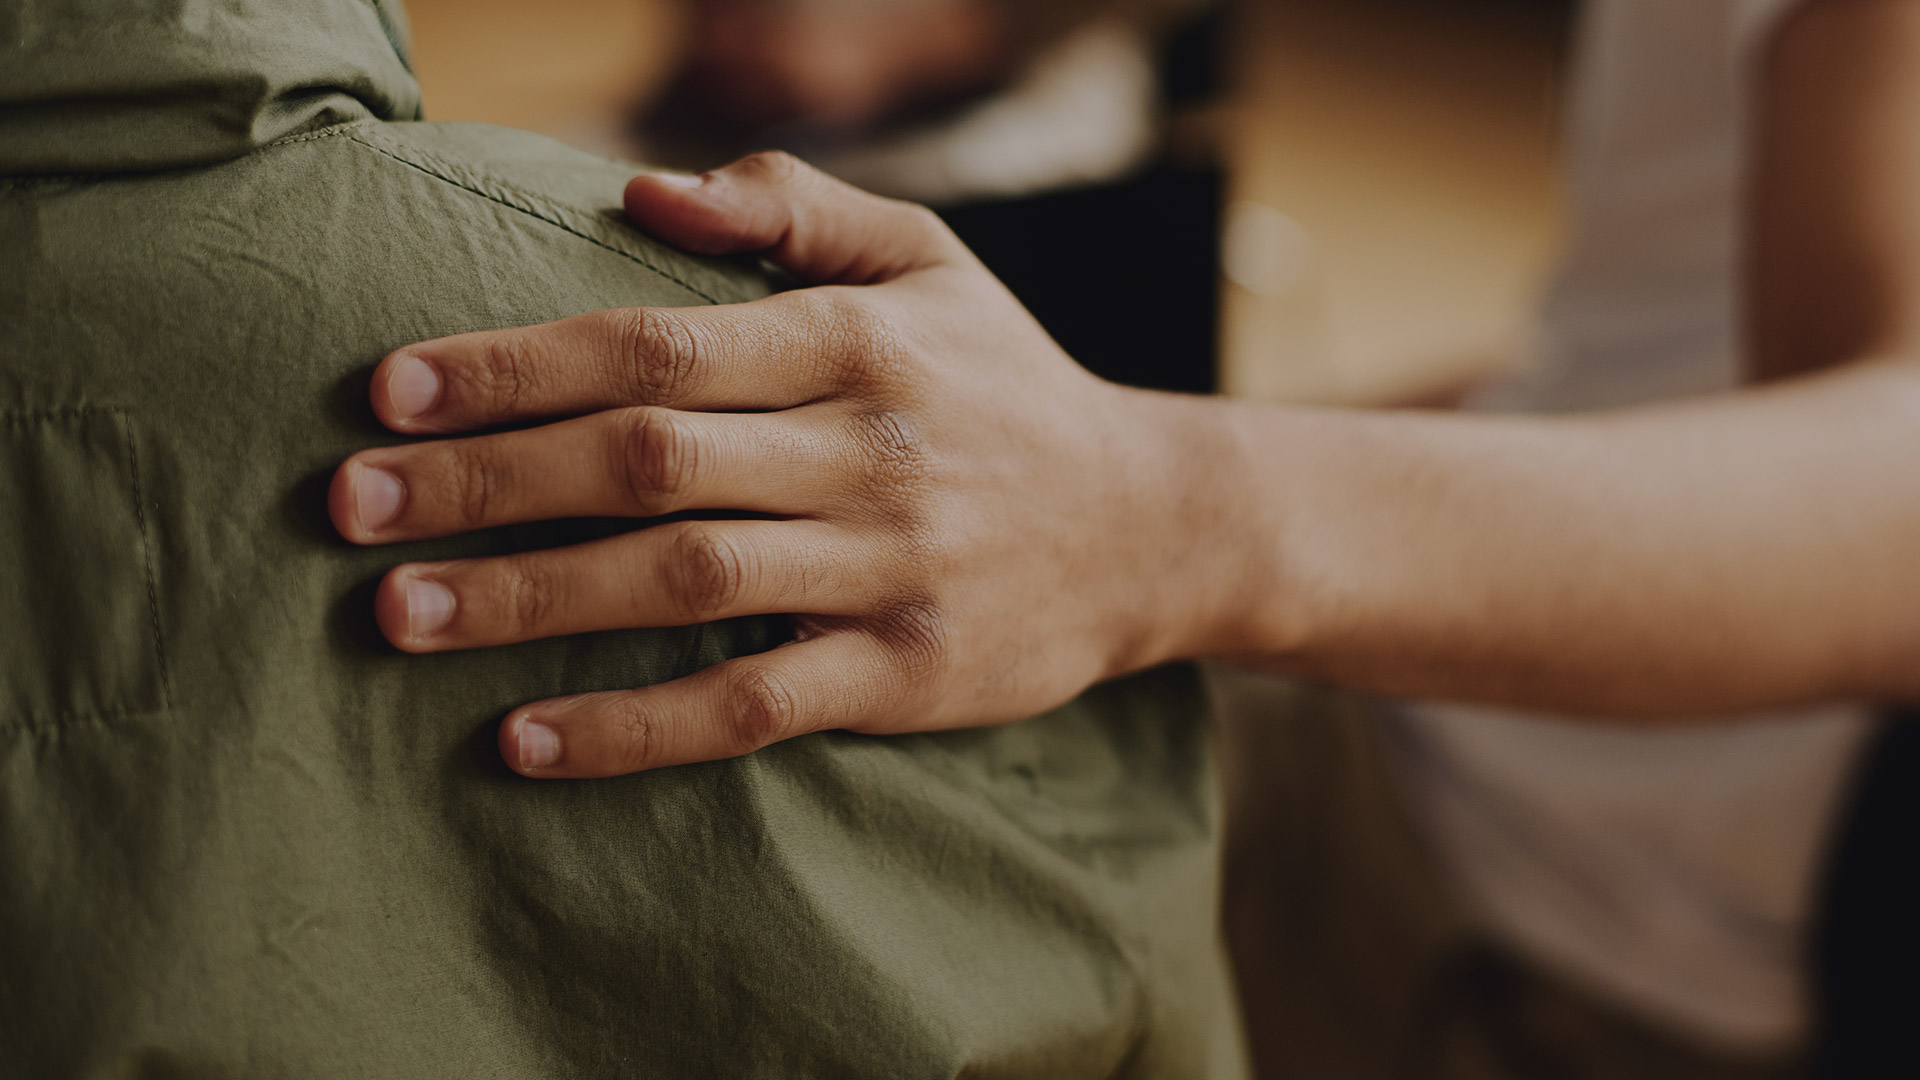 A person's hand giving a supportive touch on another individual's back. PEP supports families dealing with addiction in loved ones.